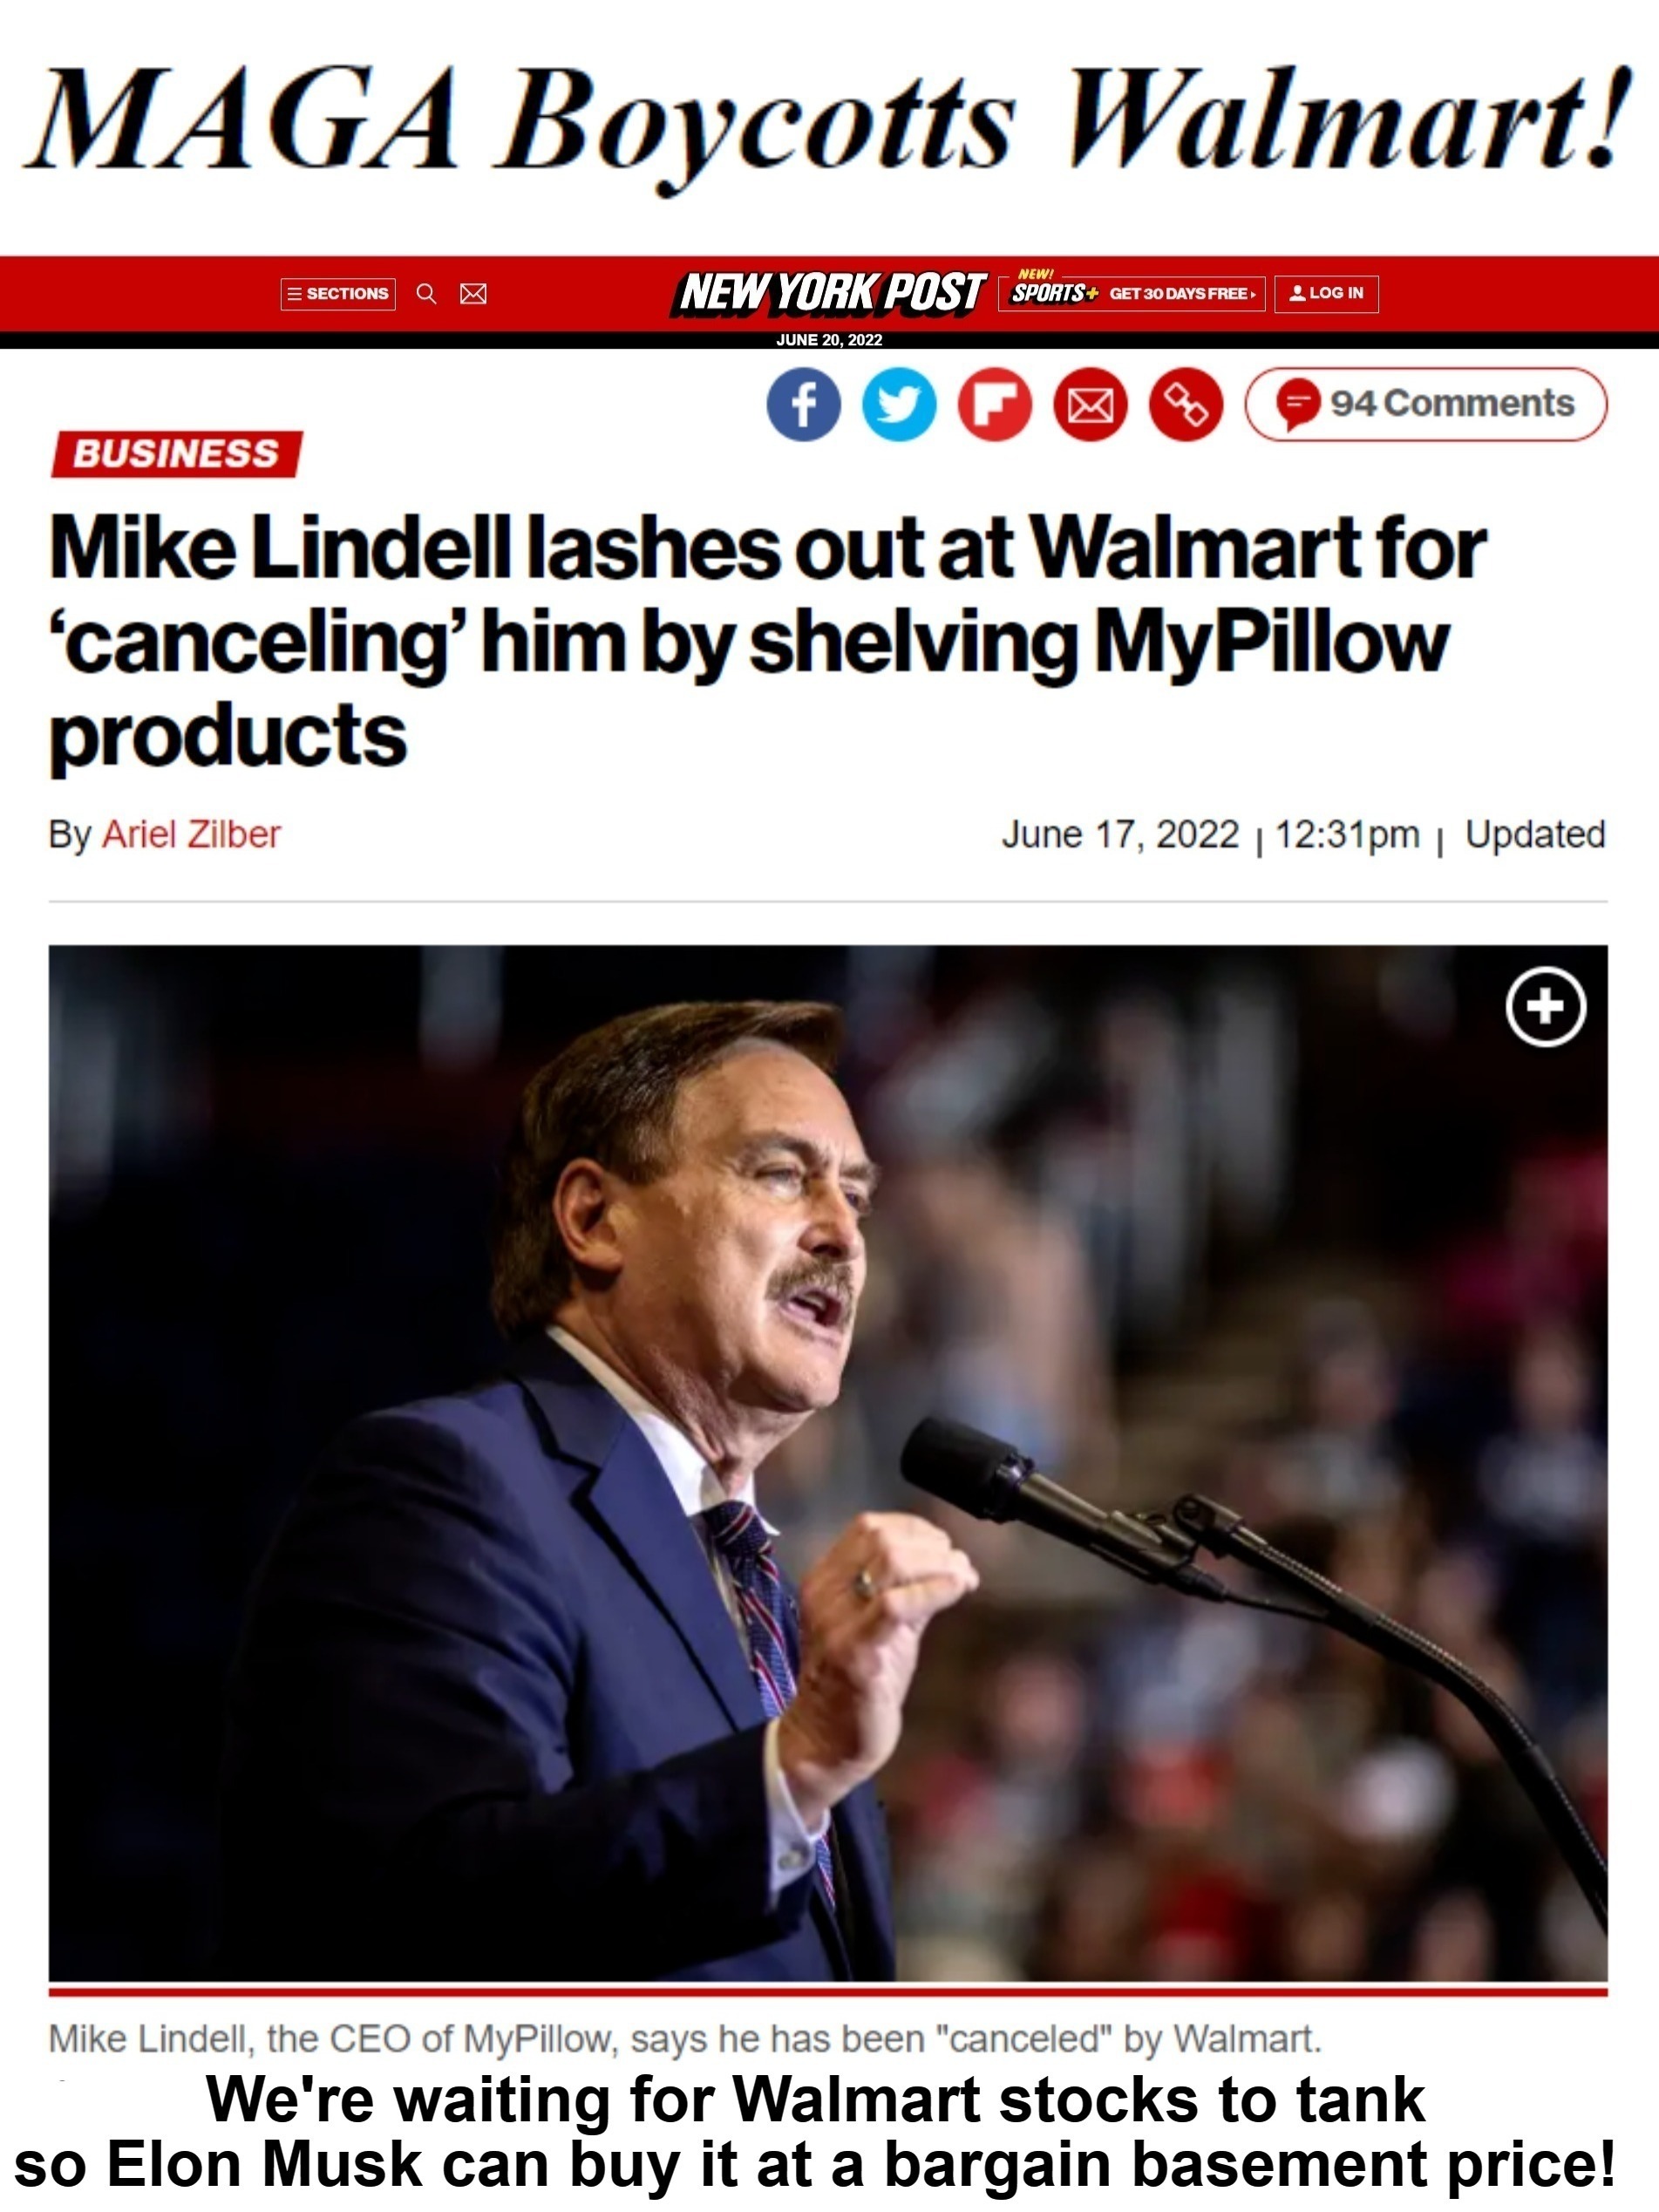 MAGA Boycott: Walmart Commits Suicide | image tagged in sam walton is rolling in his grave,my pillow,mike lindell,maga boycott,make america great again | made w/ Imgflip meme maker